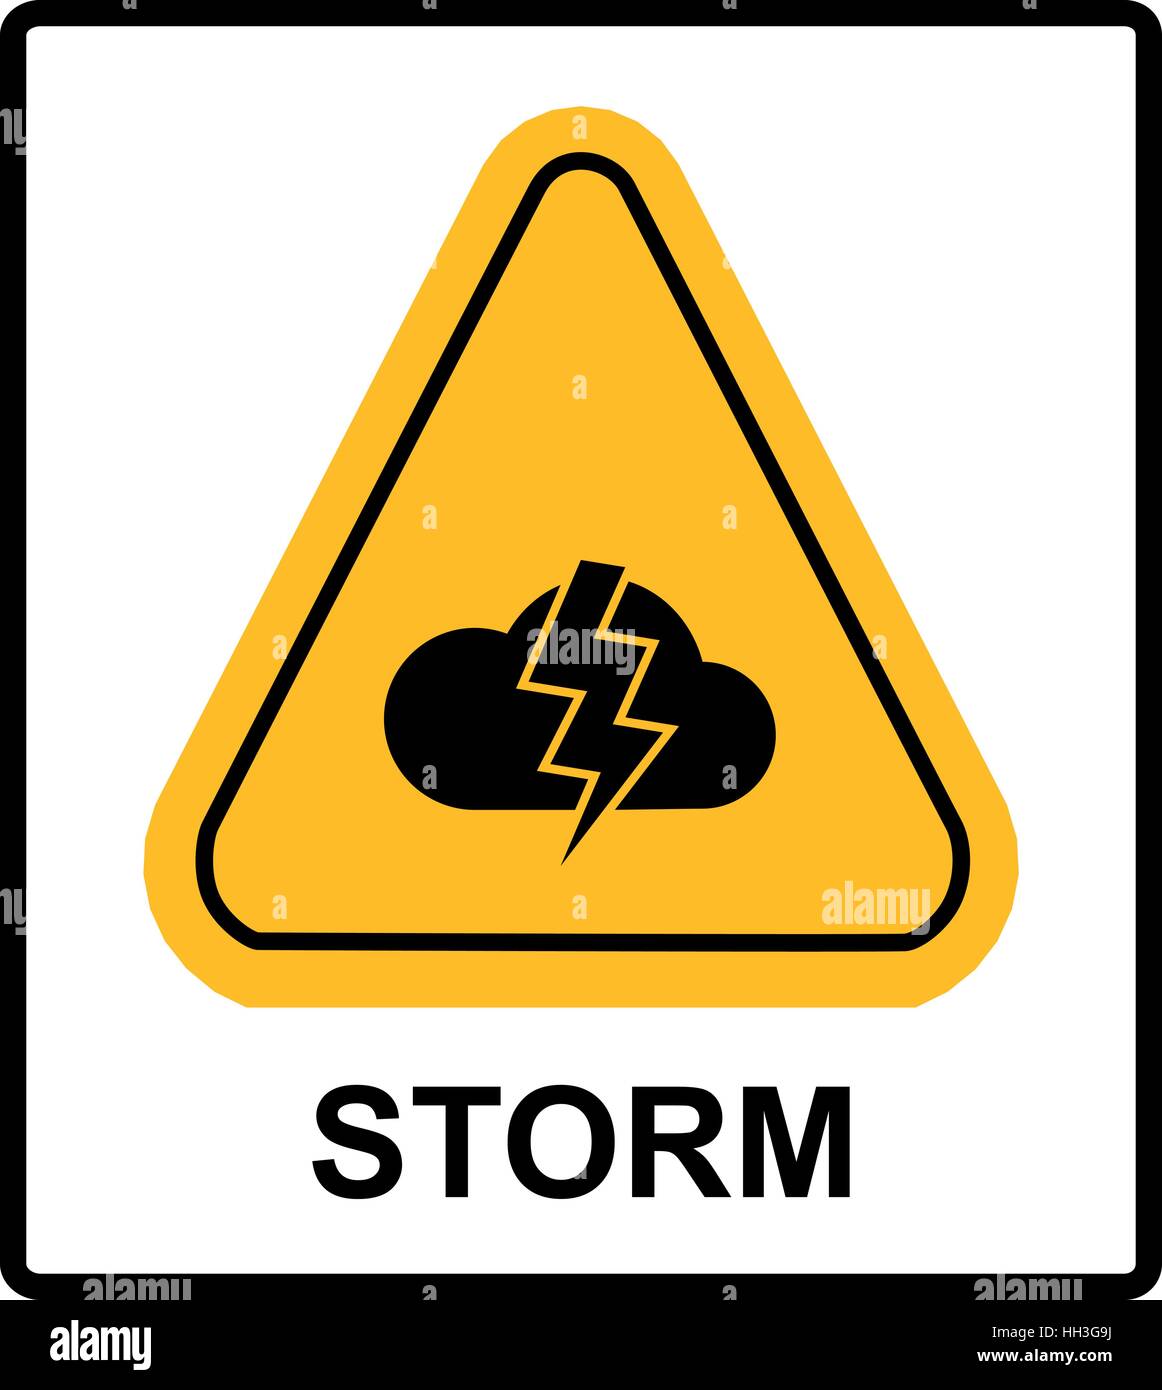 Storm Hazard sign. Vector warning sticker label for outdoors, yellow triangle isolated on white with text. Stock Vector